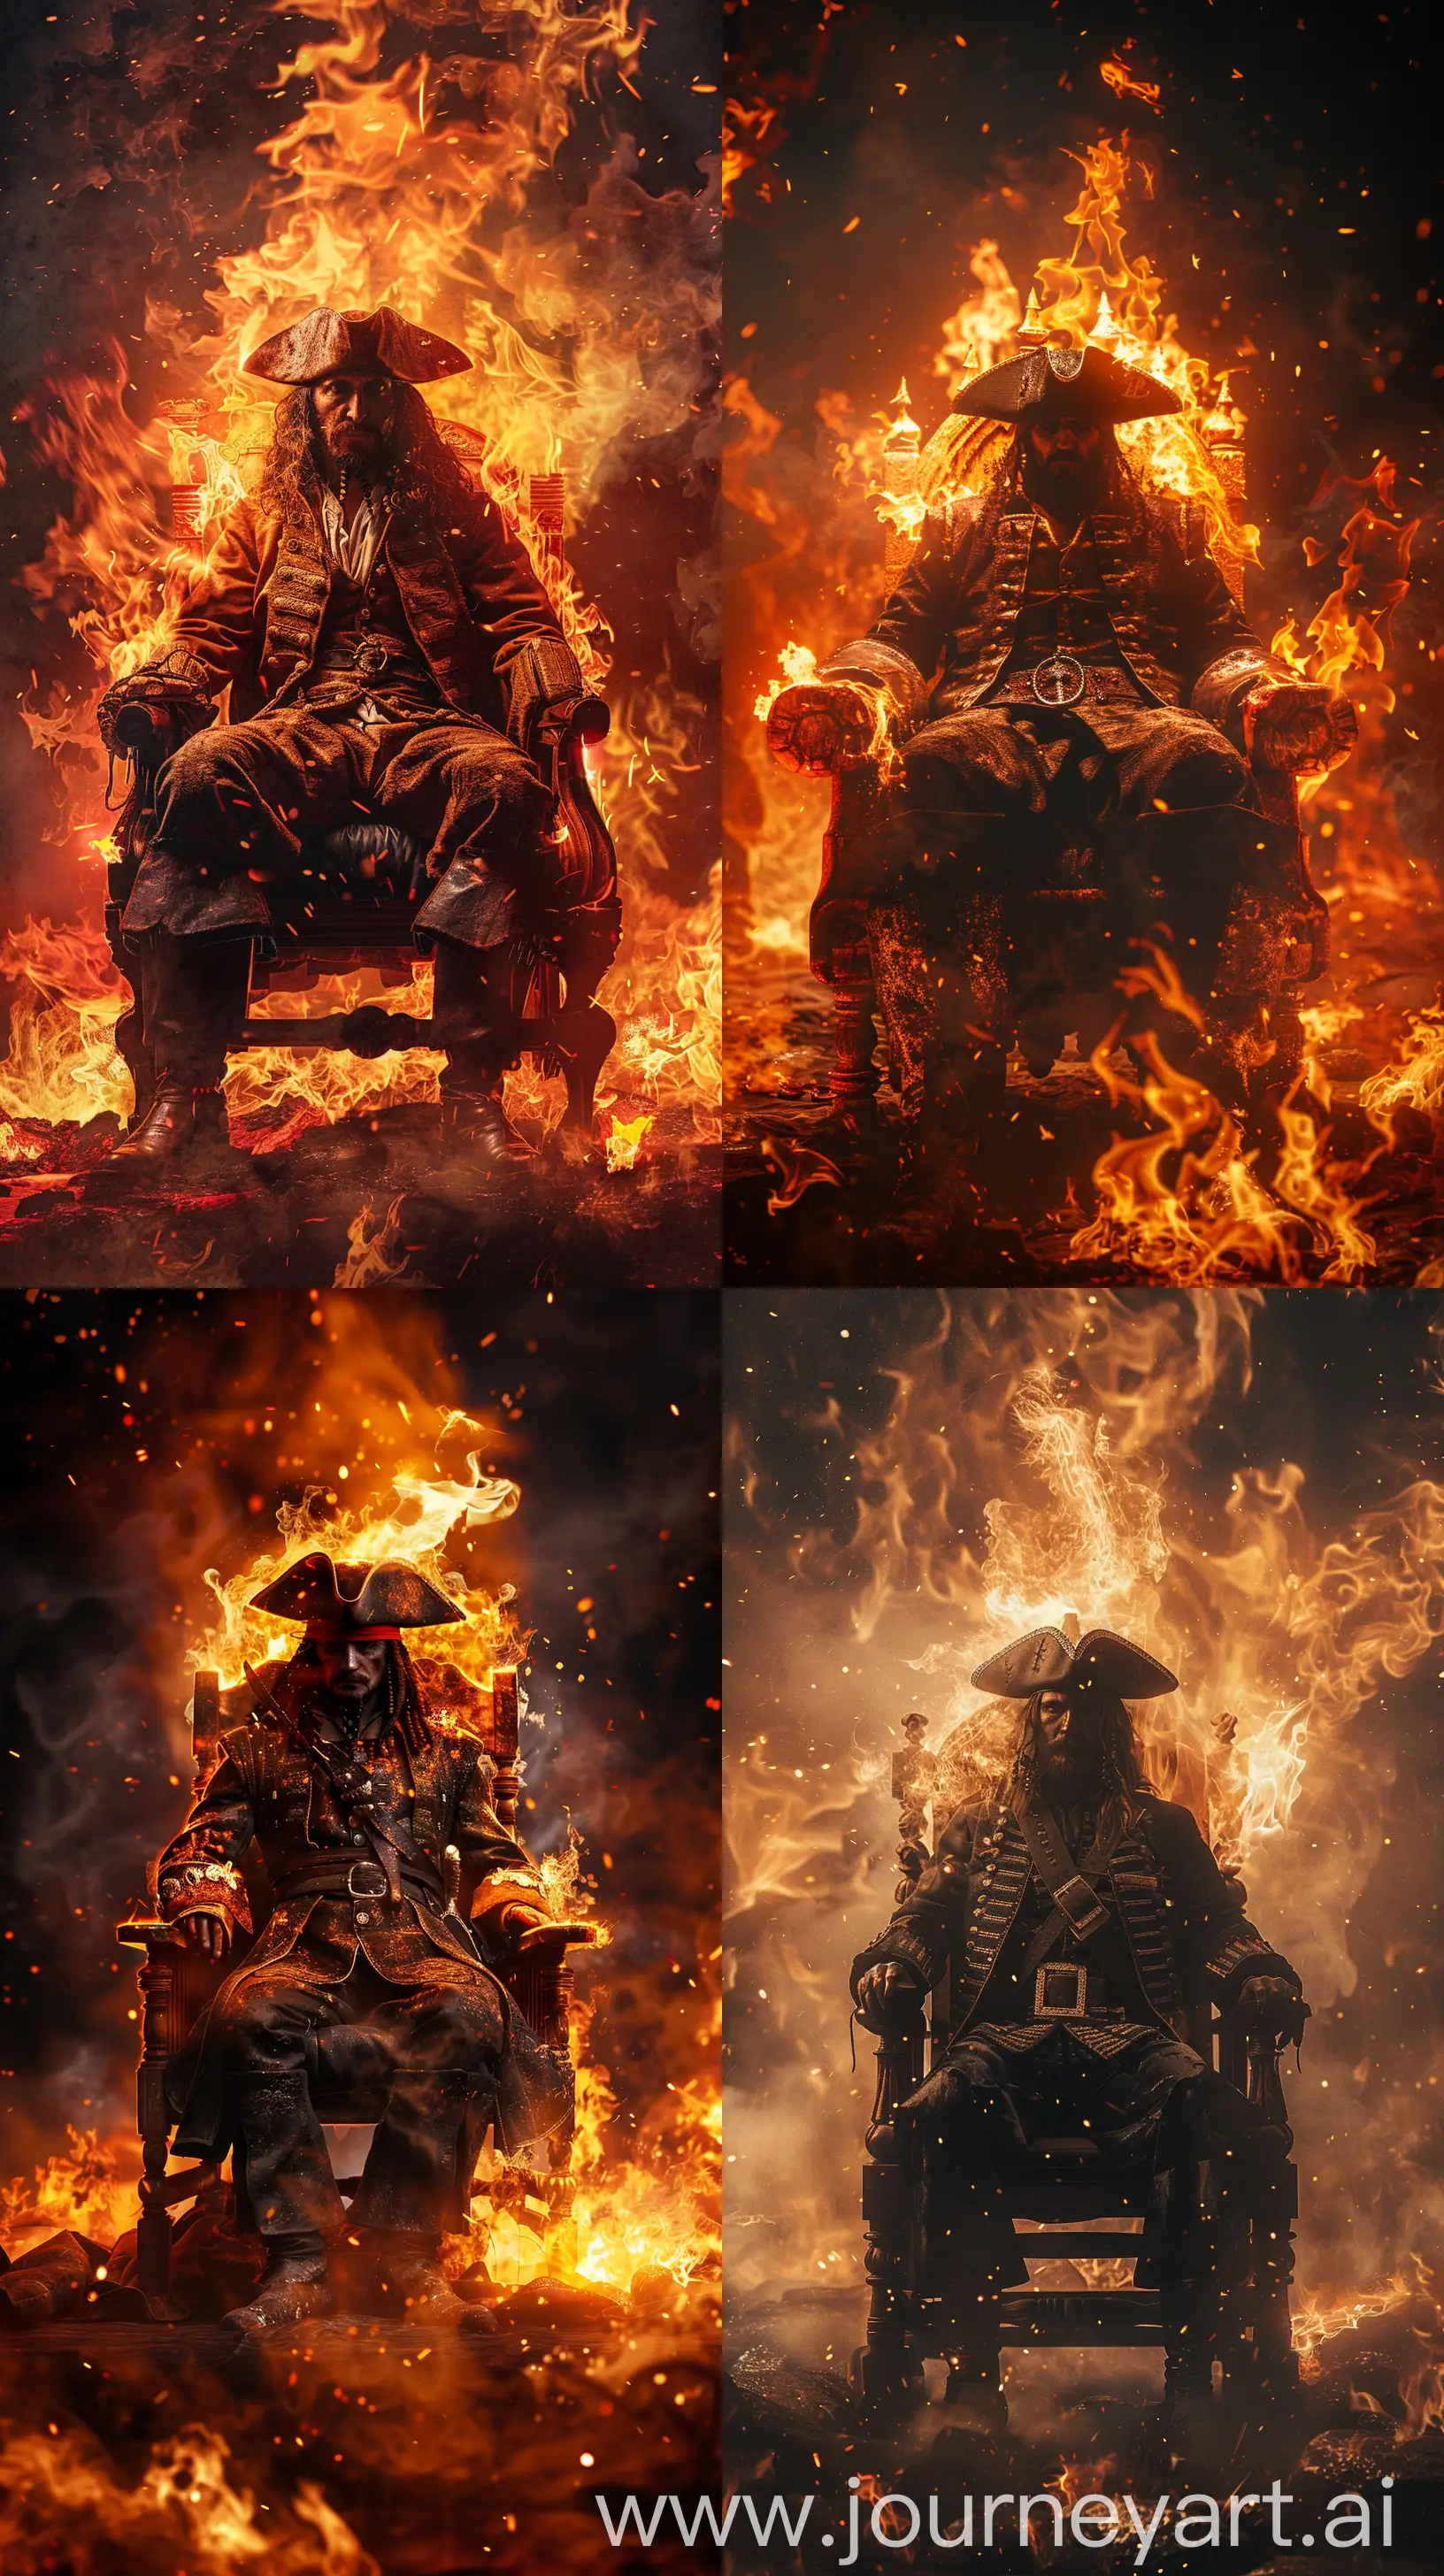 create a photorealistic image of a pirate siting on throne, engulfed in fire, everything burning, in the style of epic cinematographic --ar 9:16 --v 6.0